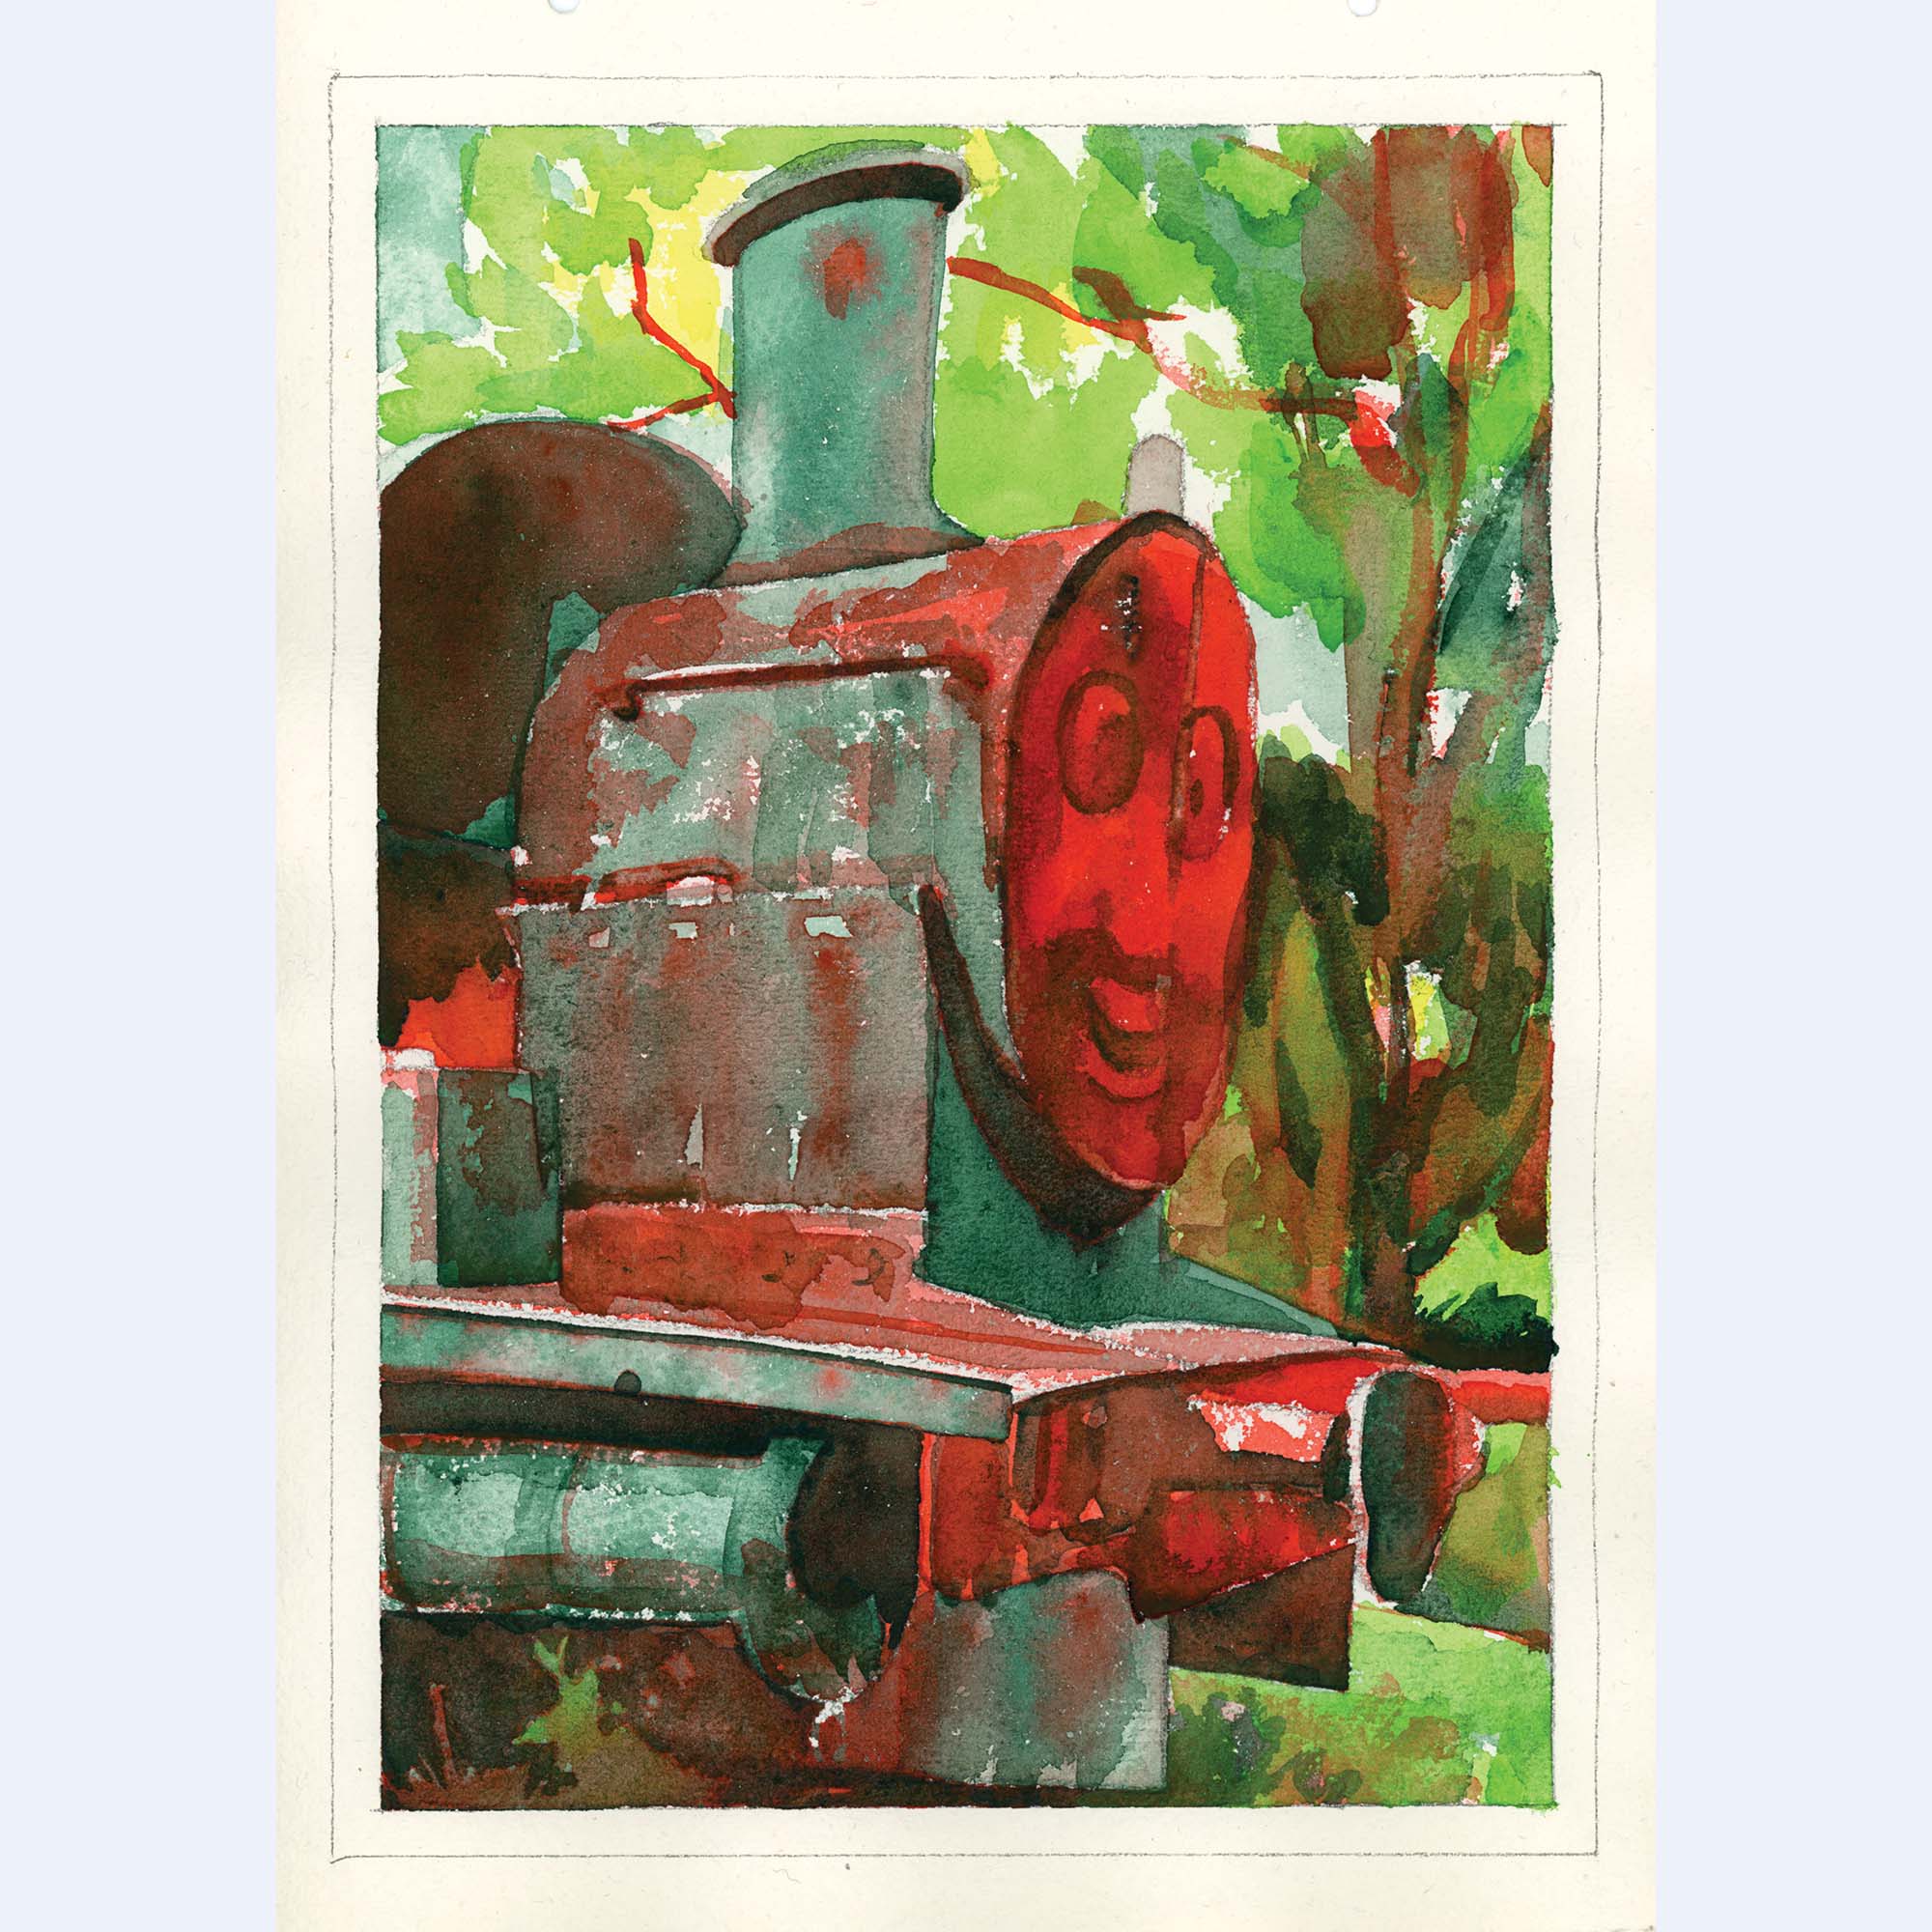 abandoned train in the woods with a red smiling face